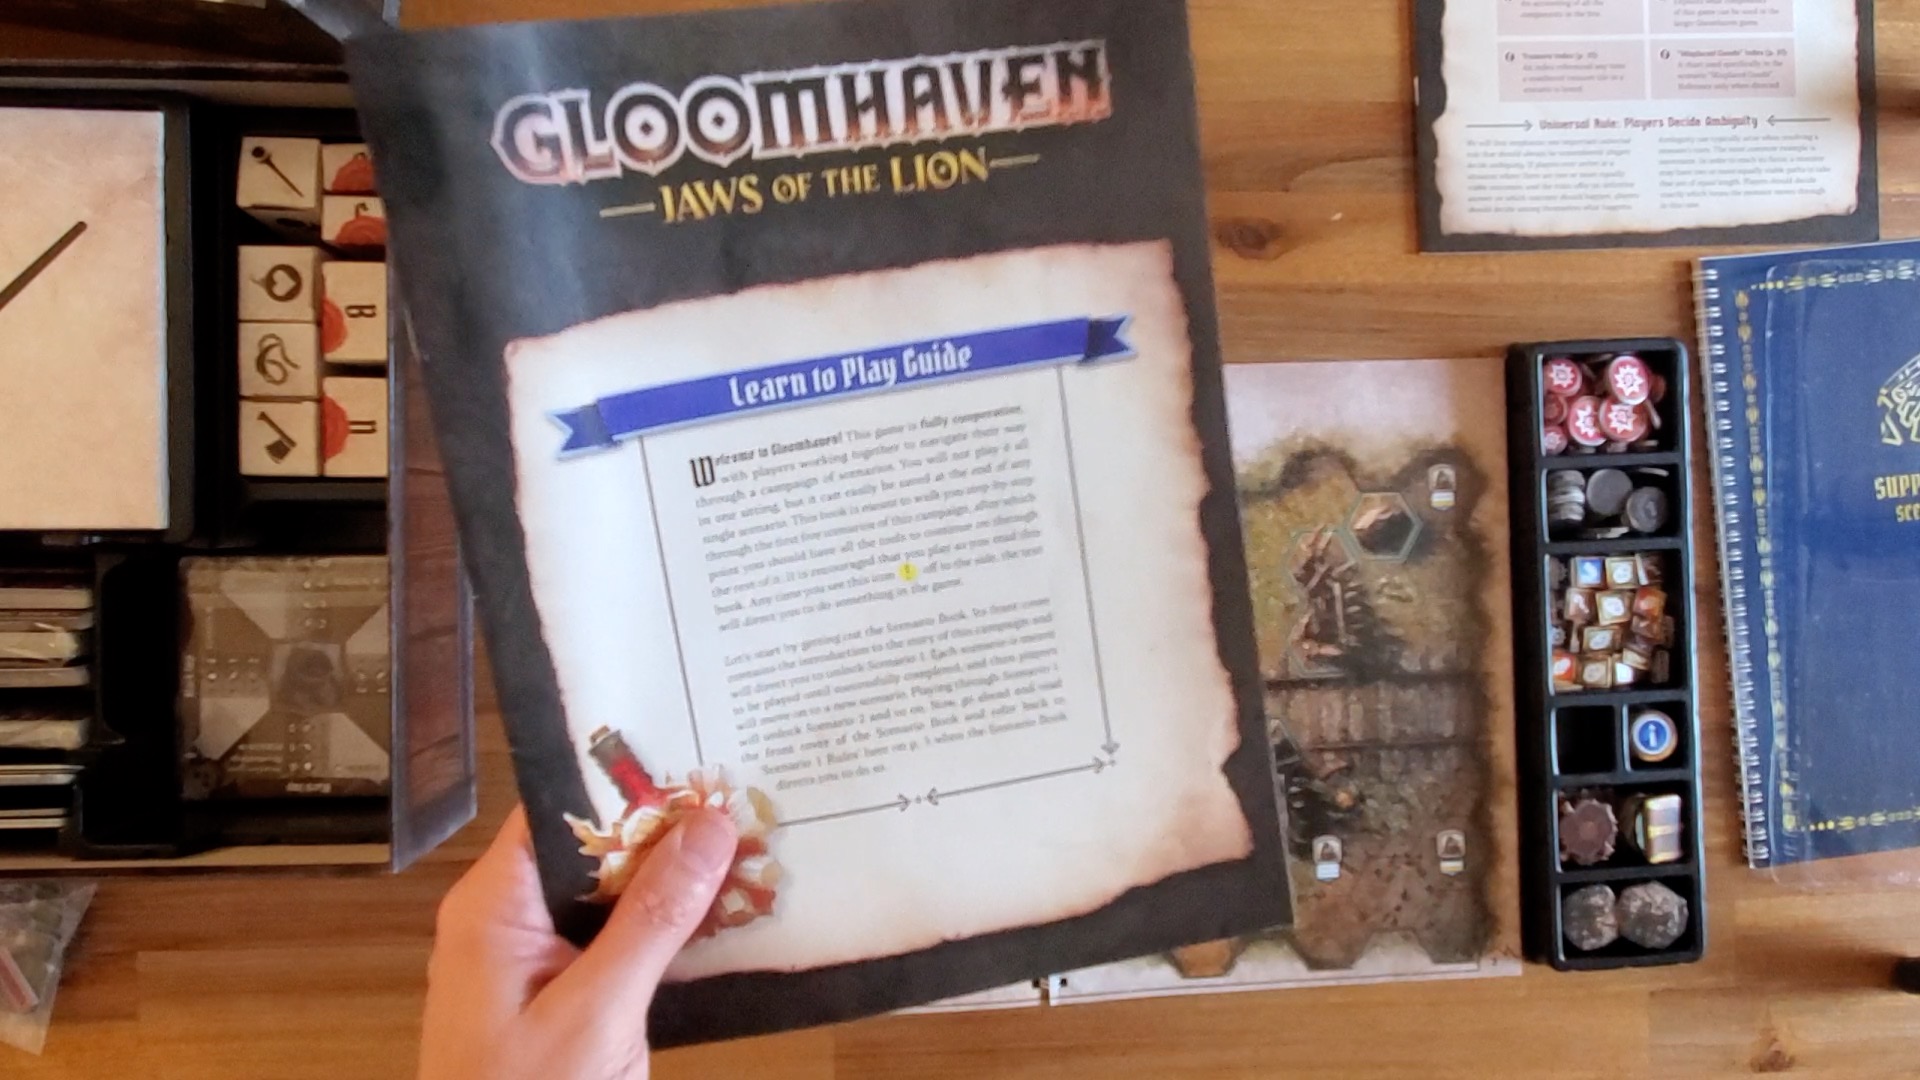 Inside the Box #1:  Gloomhaven: Jaws of the Lion